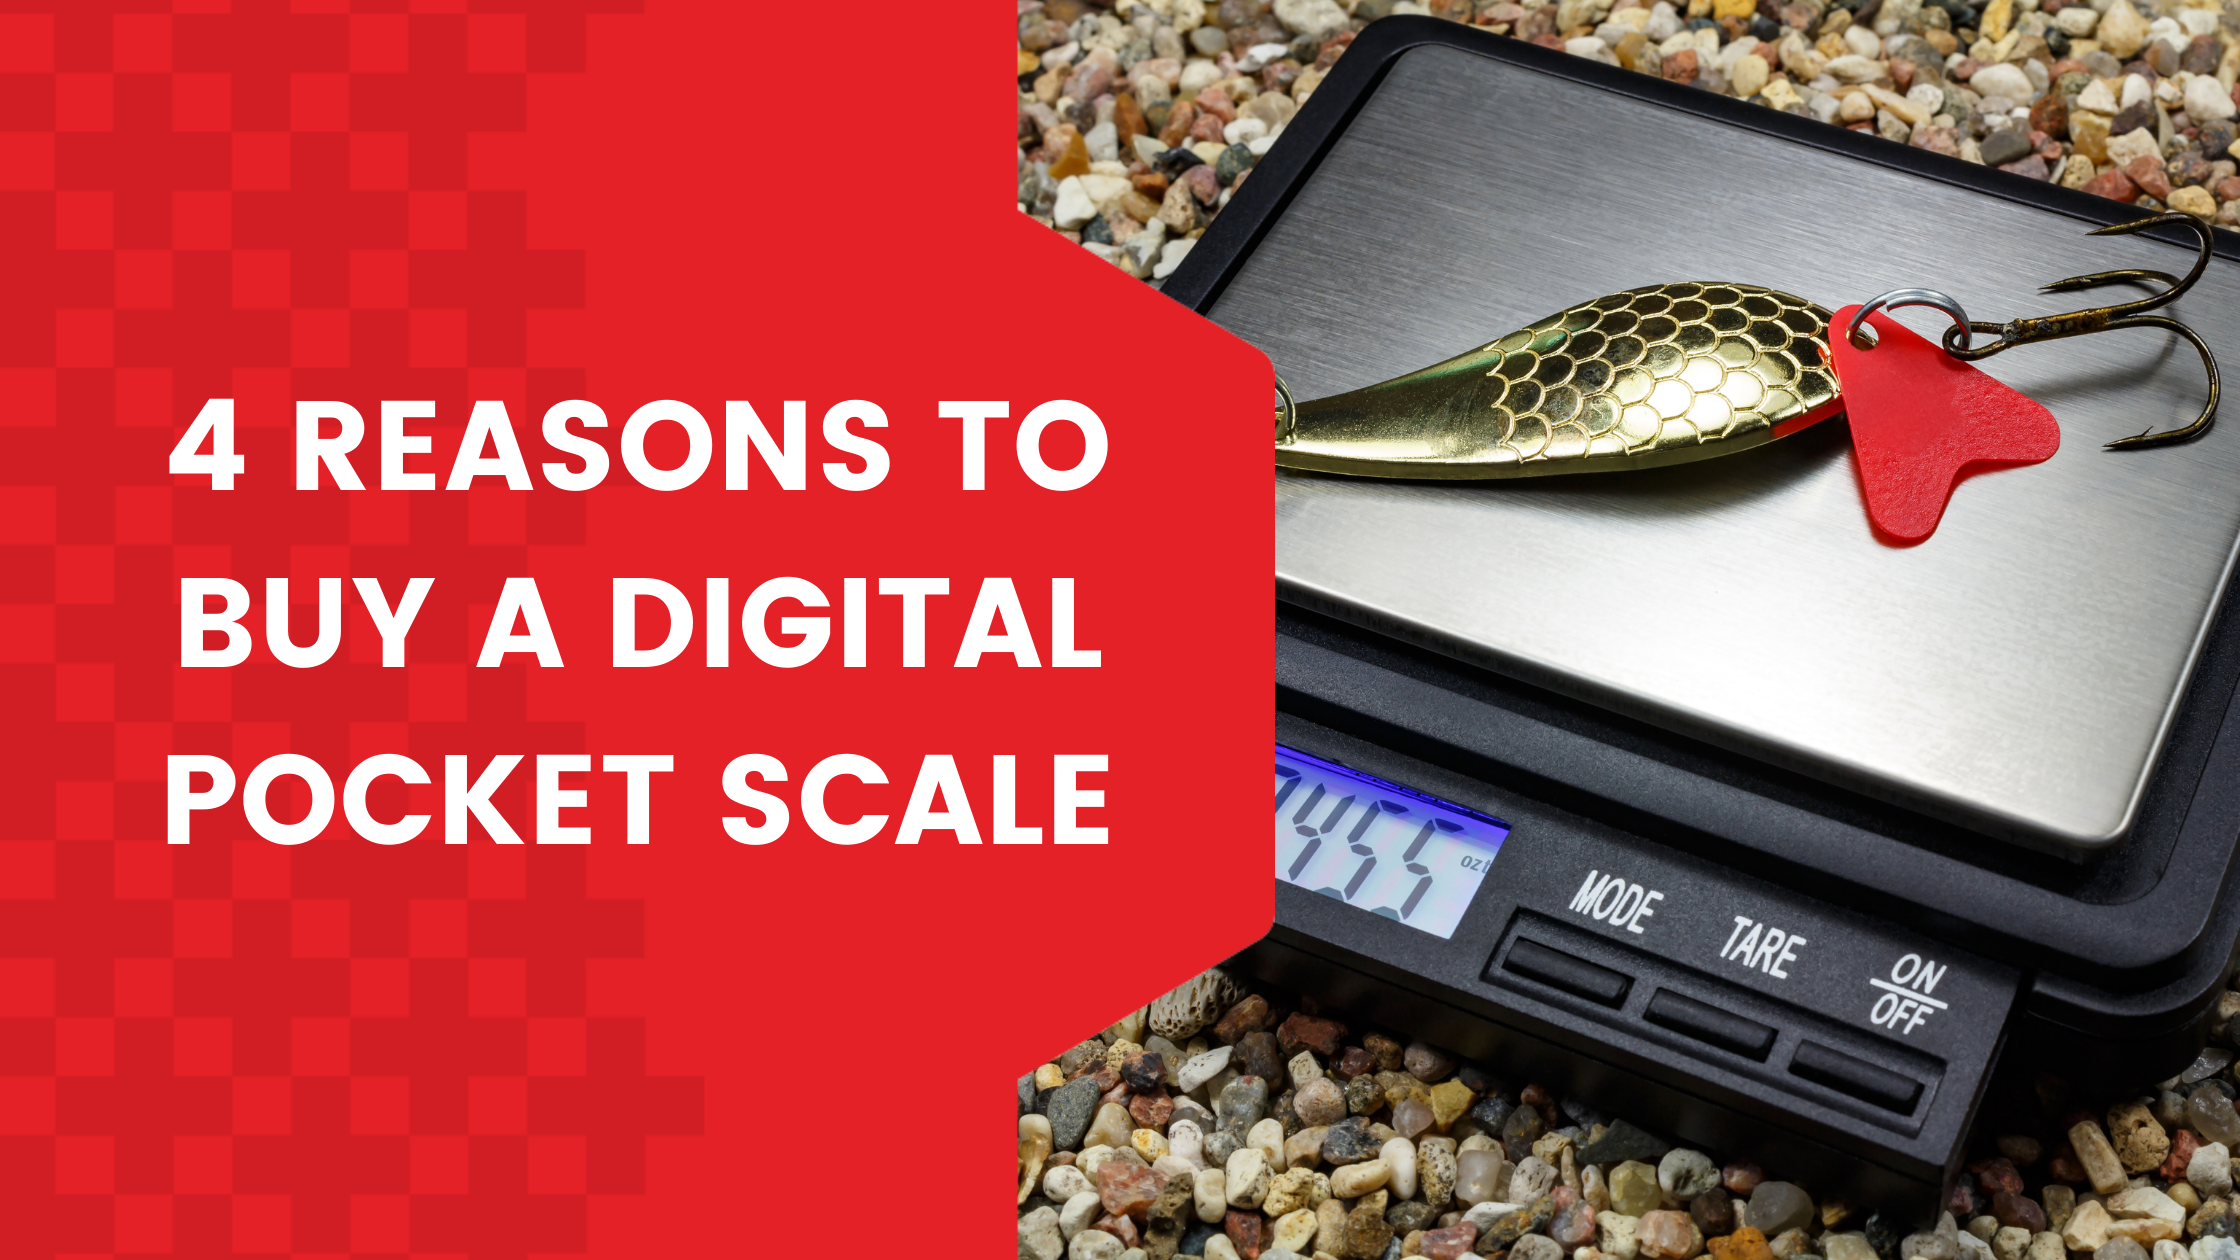 https://cdn11.bigcommerce.com/s-errhy7umuu/product_images/uploaded_images/4-reasons-to-buy-a-digital-pocket-scale.png